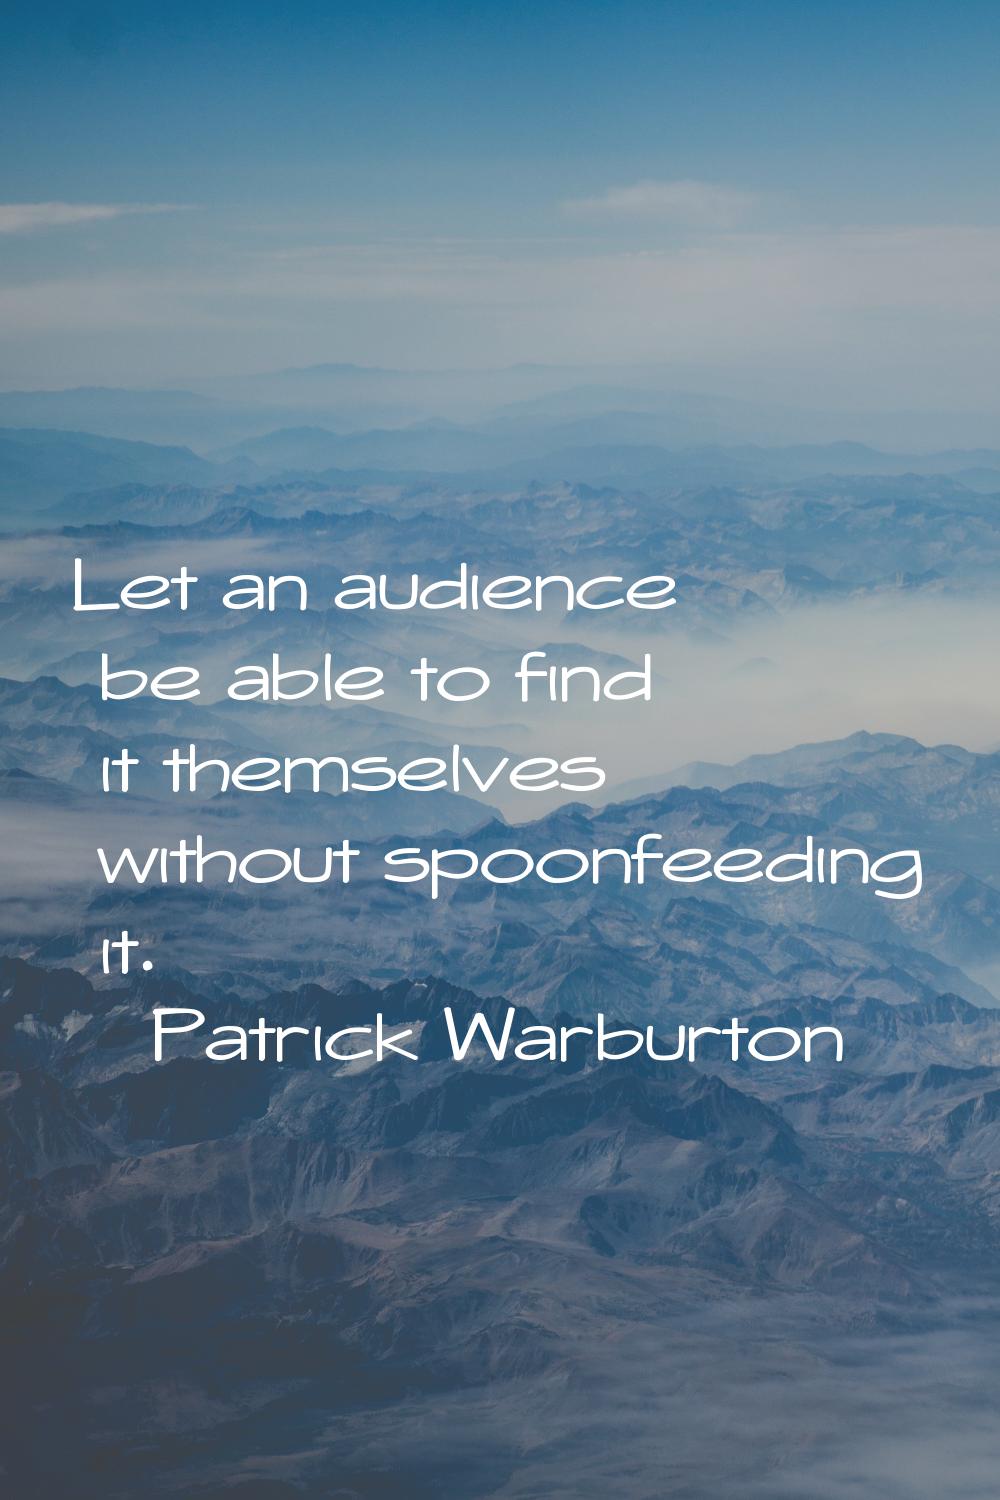 Let an audience be able to find it themselves without spoonfeeding it.